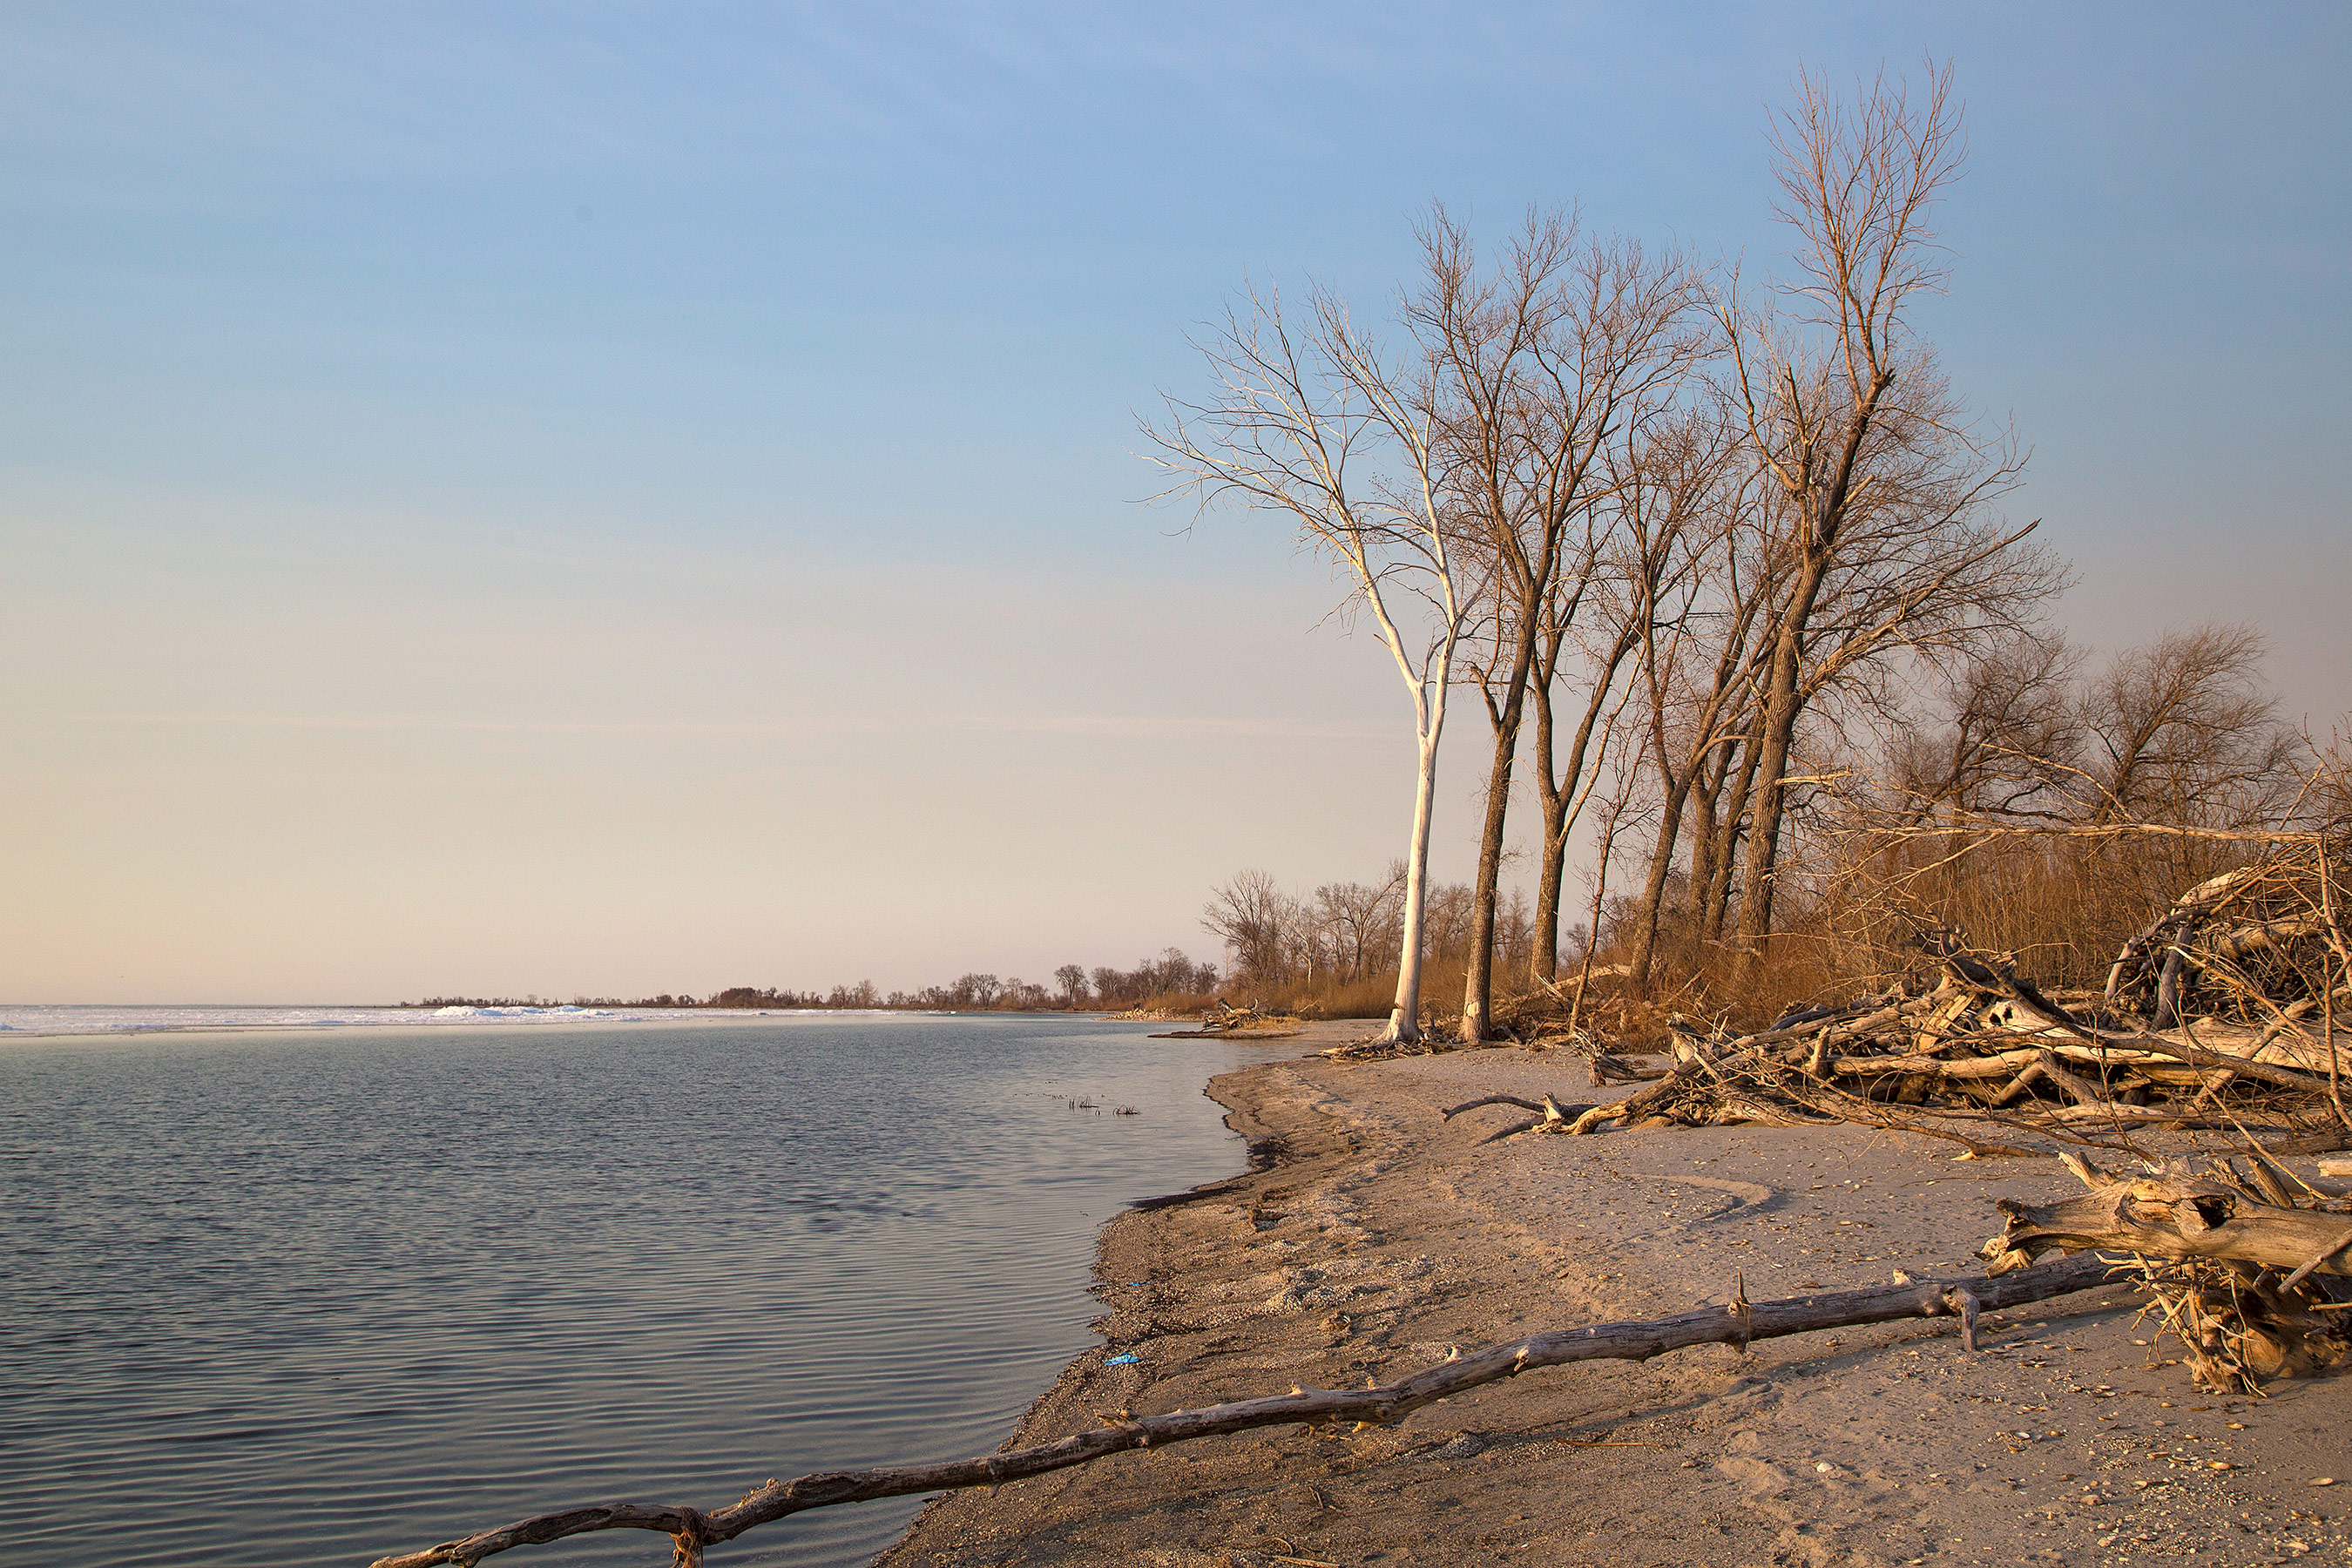 Spring sunset on the shores of St. Ambroise Provincial Park